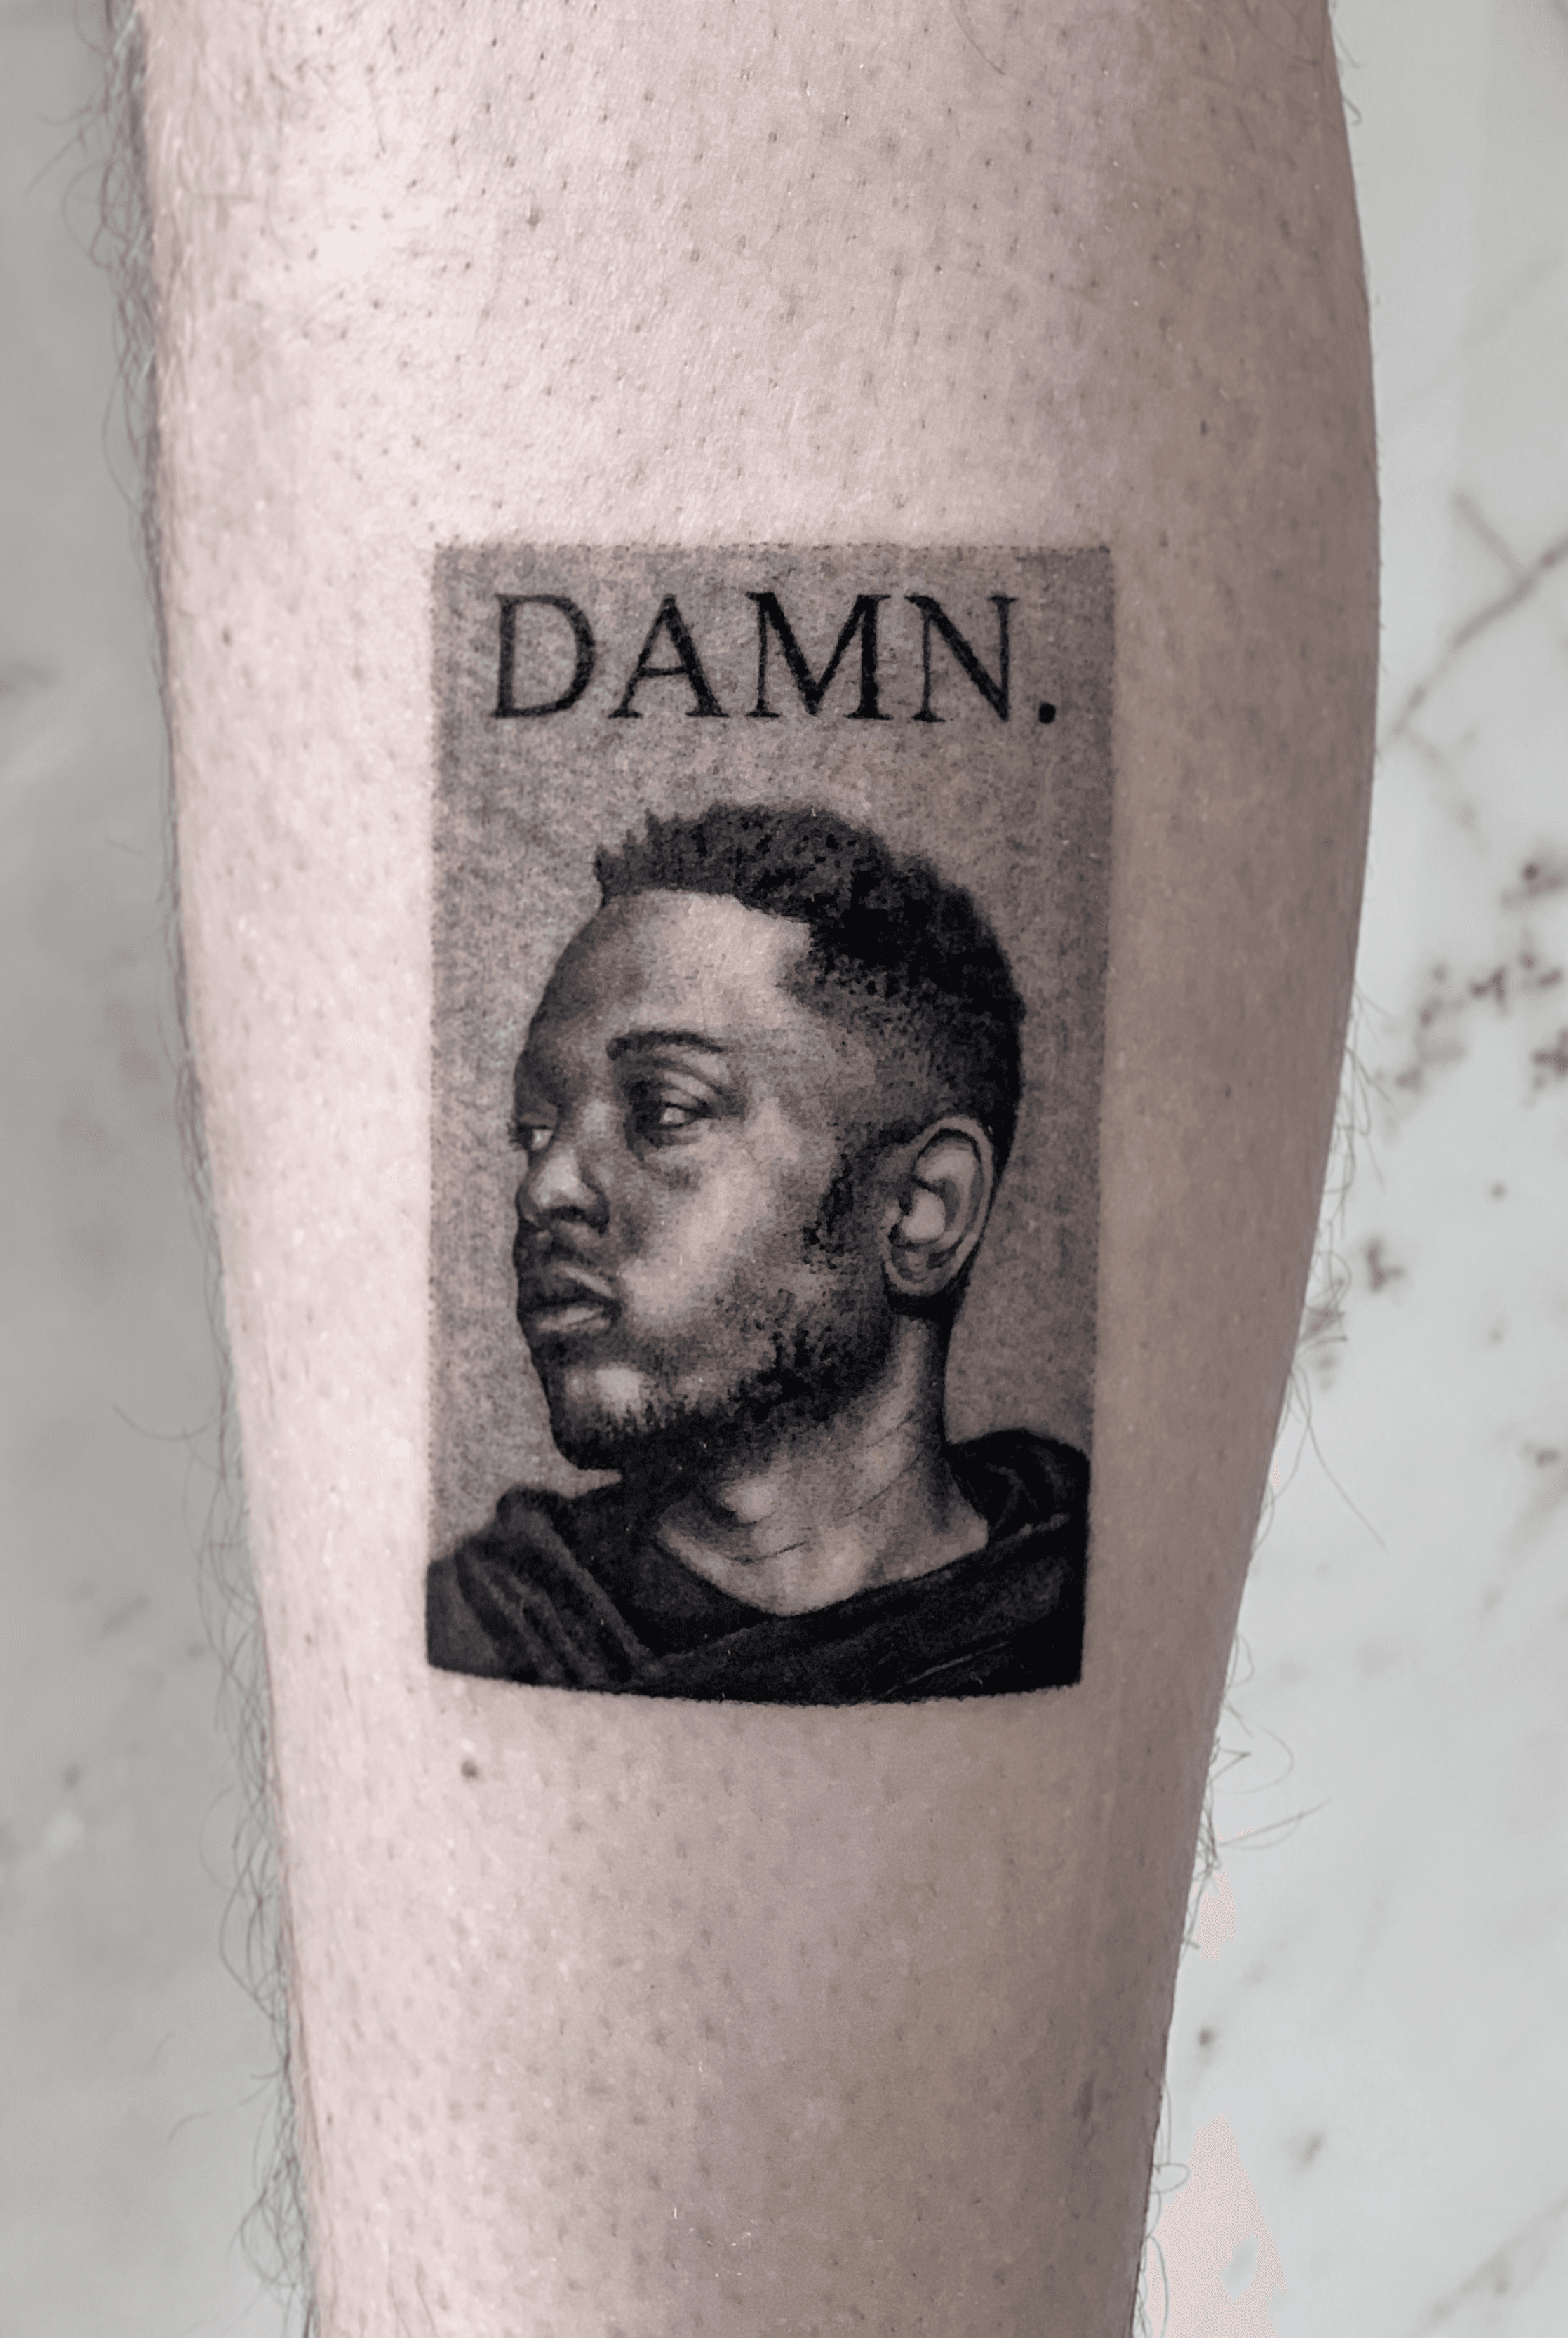 Anyone know any cool Kendrick Lamar tattoos out there Looking for some  inspiration to help come up with design thatll ill get next year when im  finally old enough  rKendrickLamar